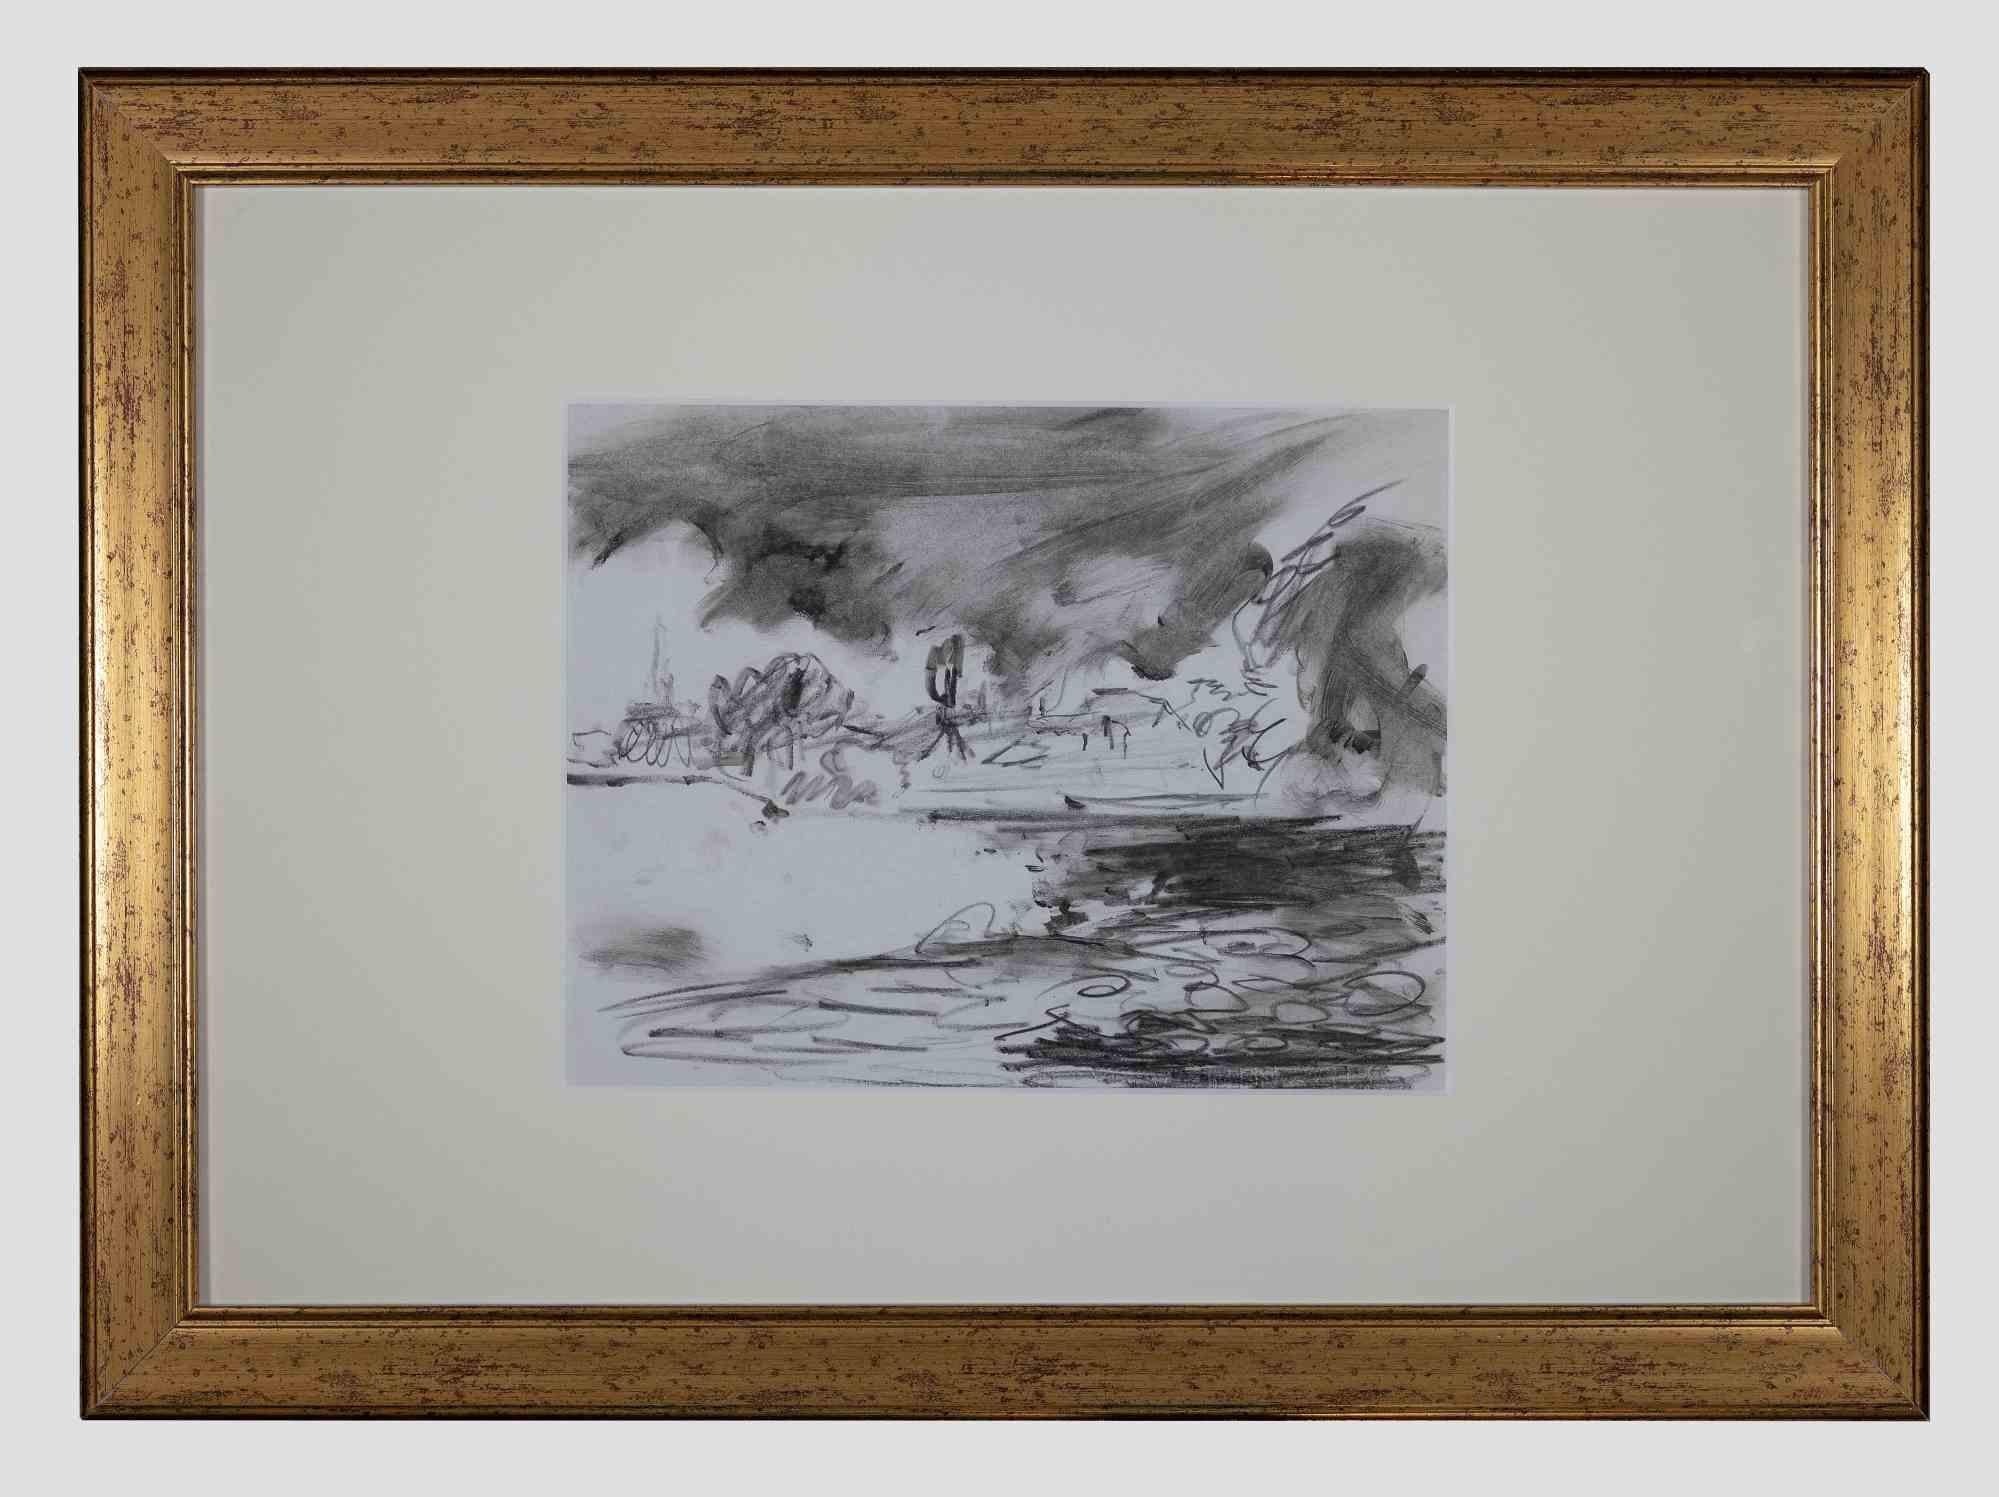 Sky and Sea - Original Drawing - Mid 20th Century - Art by Unknown